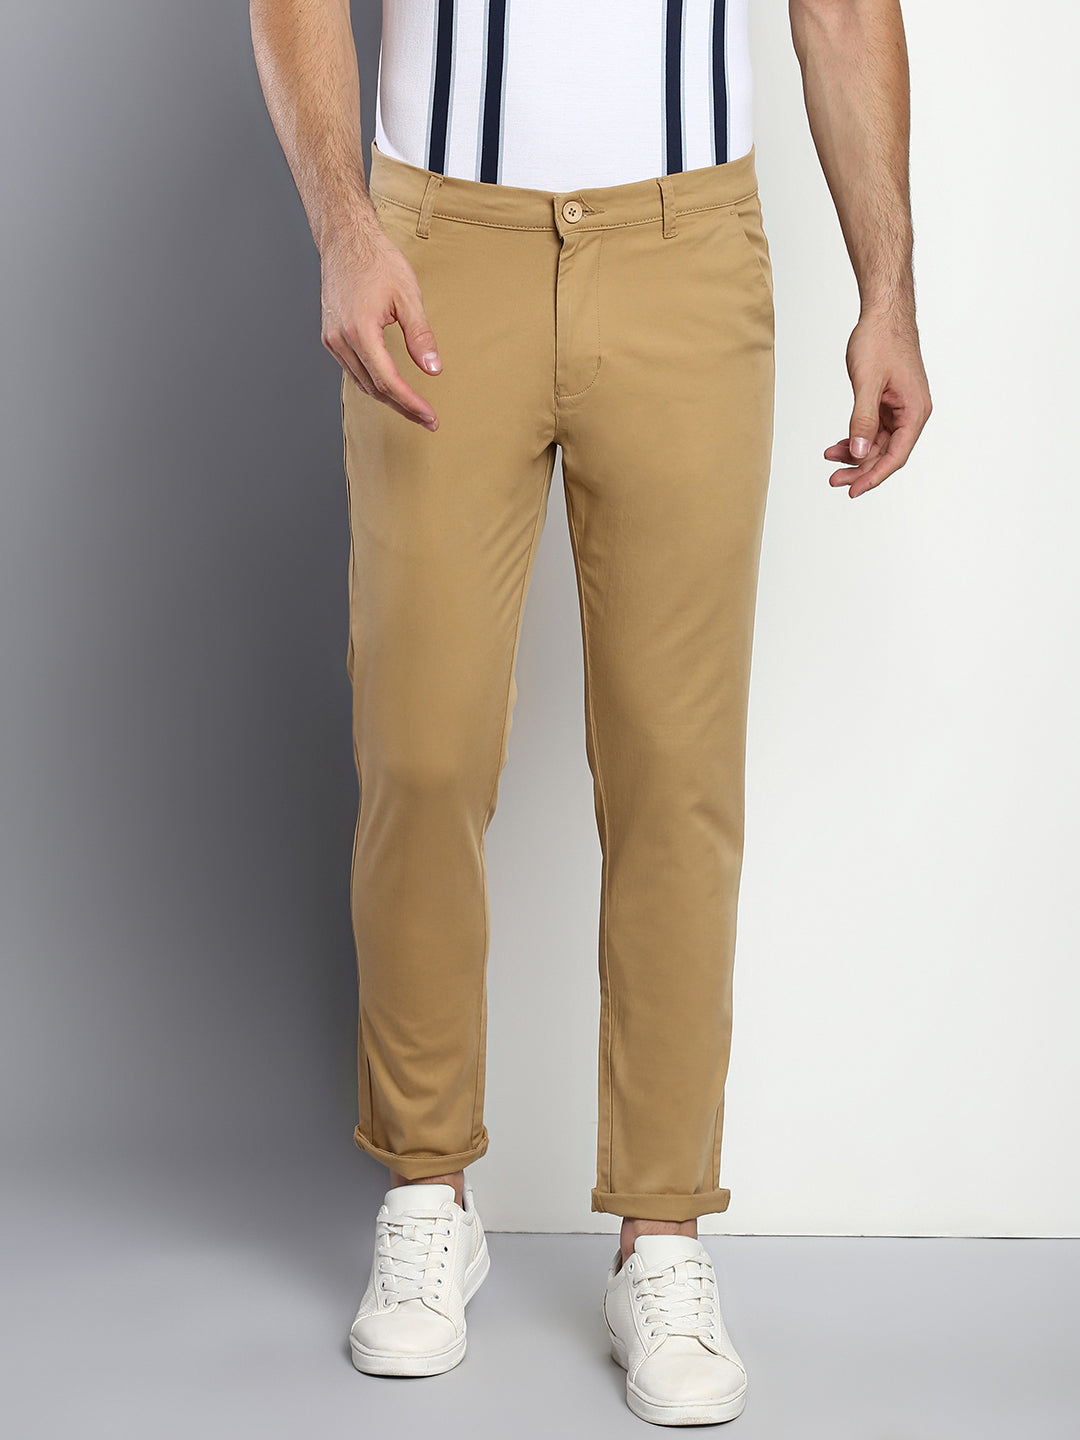 The Best Khaki Pants for Men: Smart Everyday Style Options